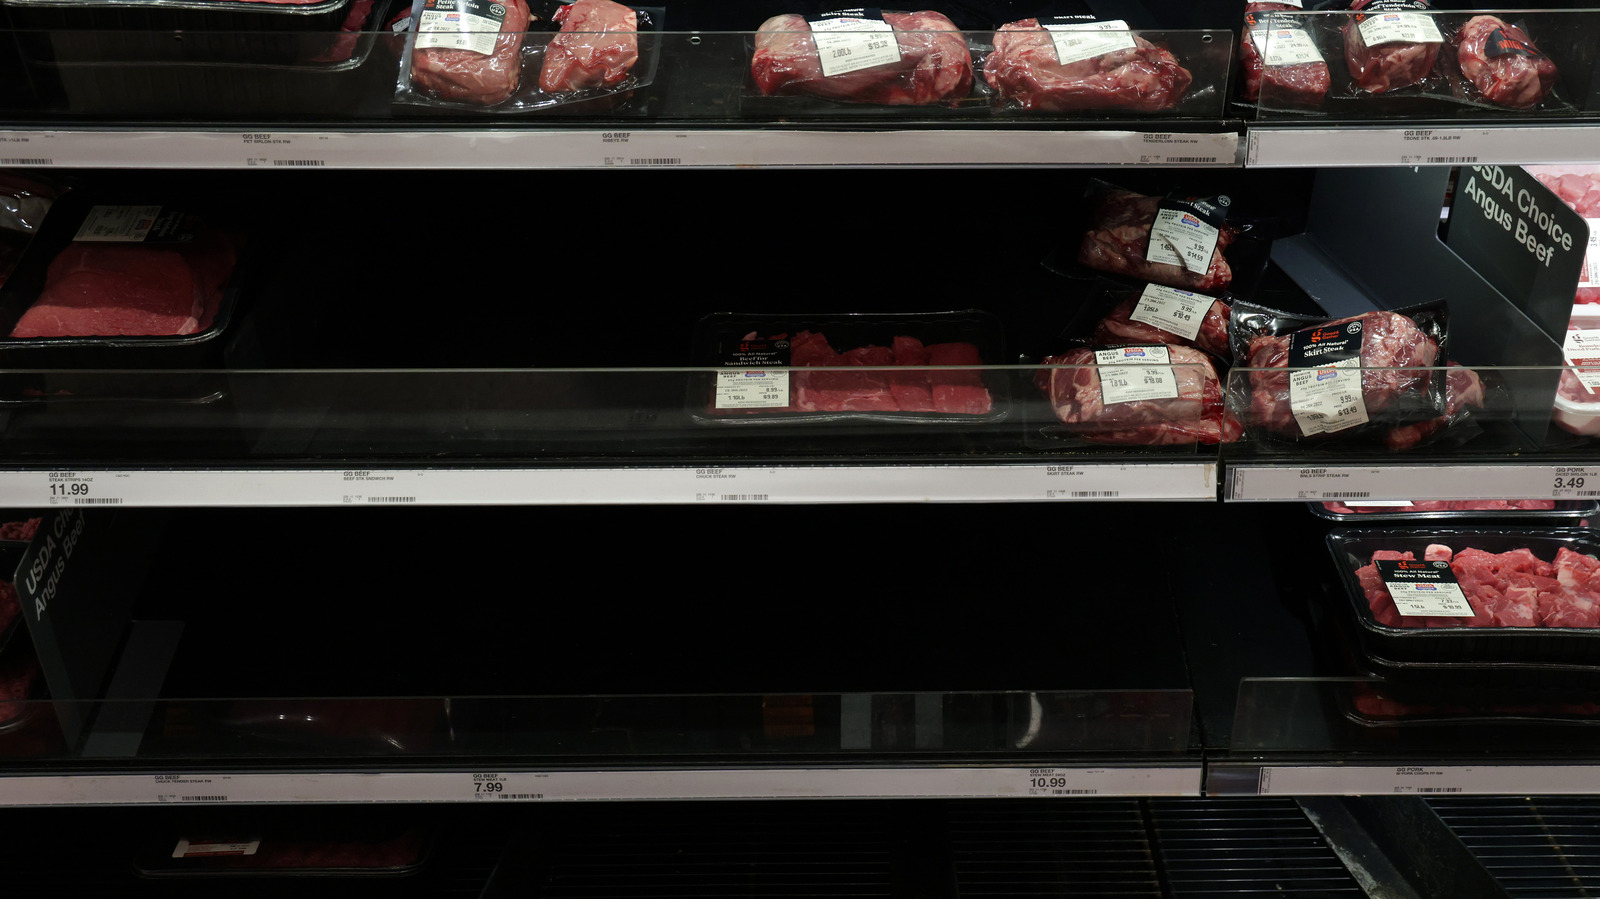 What You Need To Know About The 2022 Meat Shortage